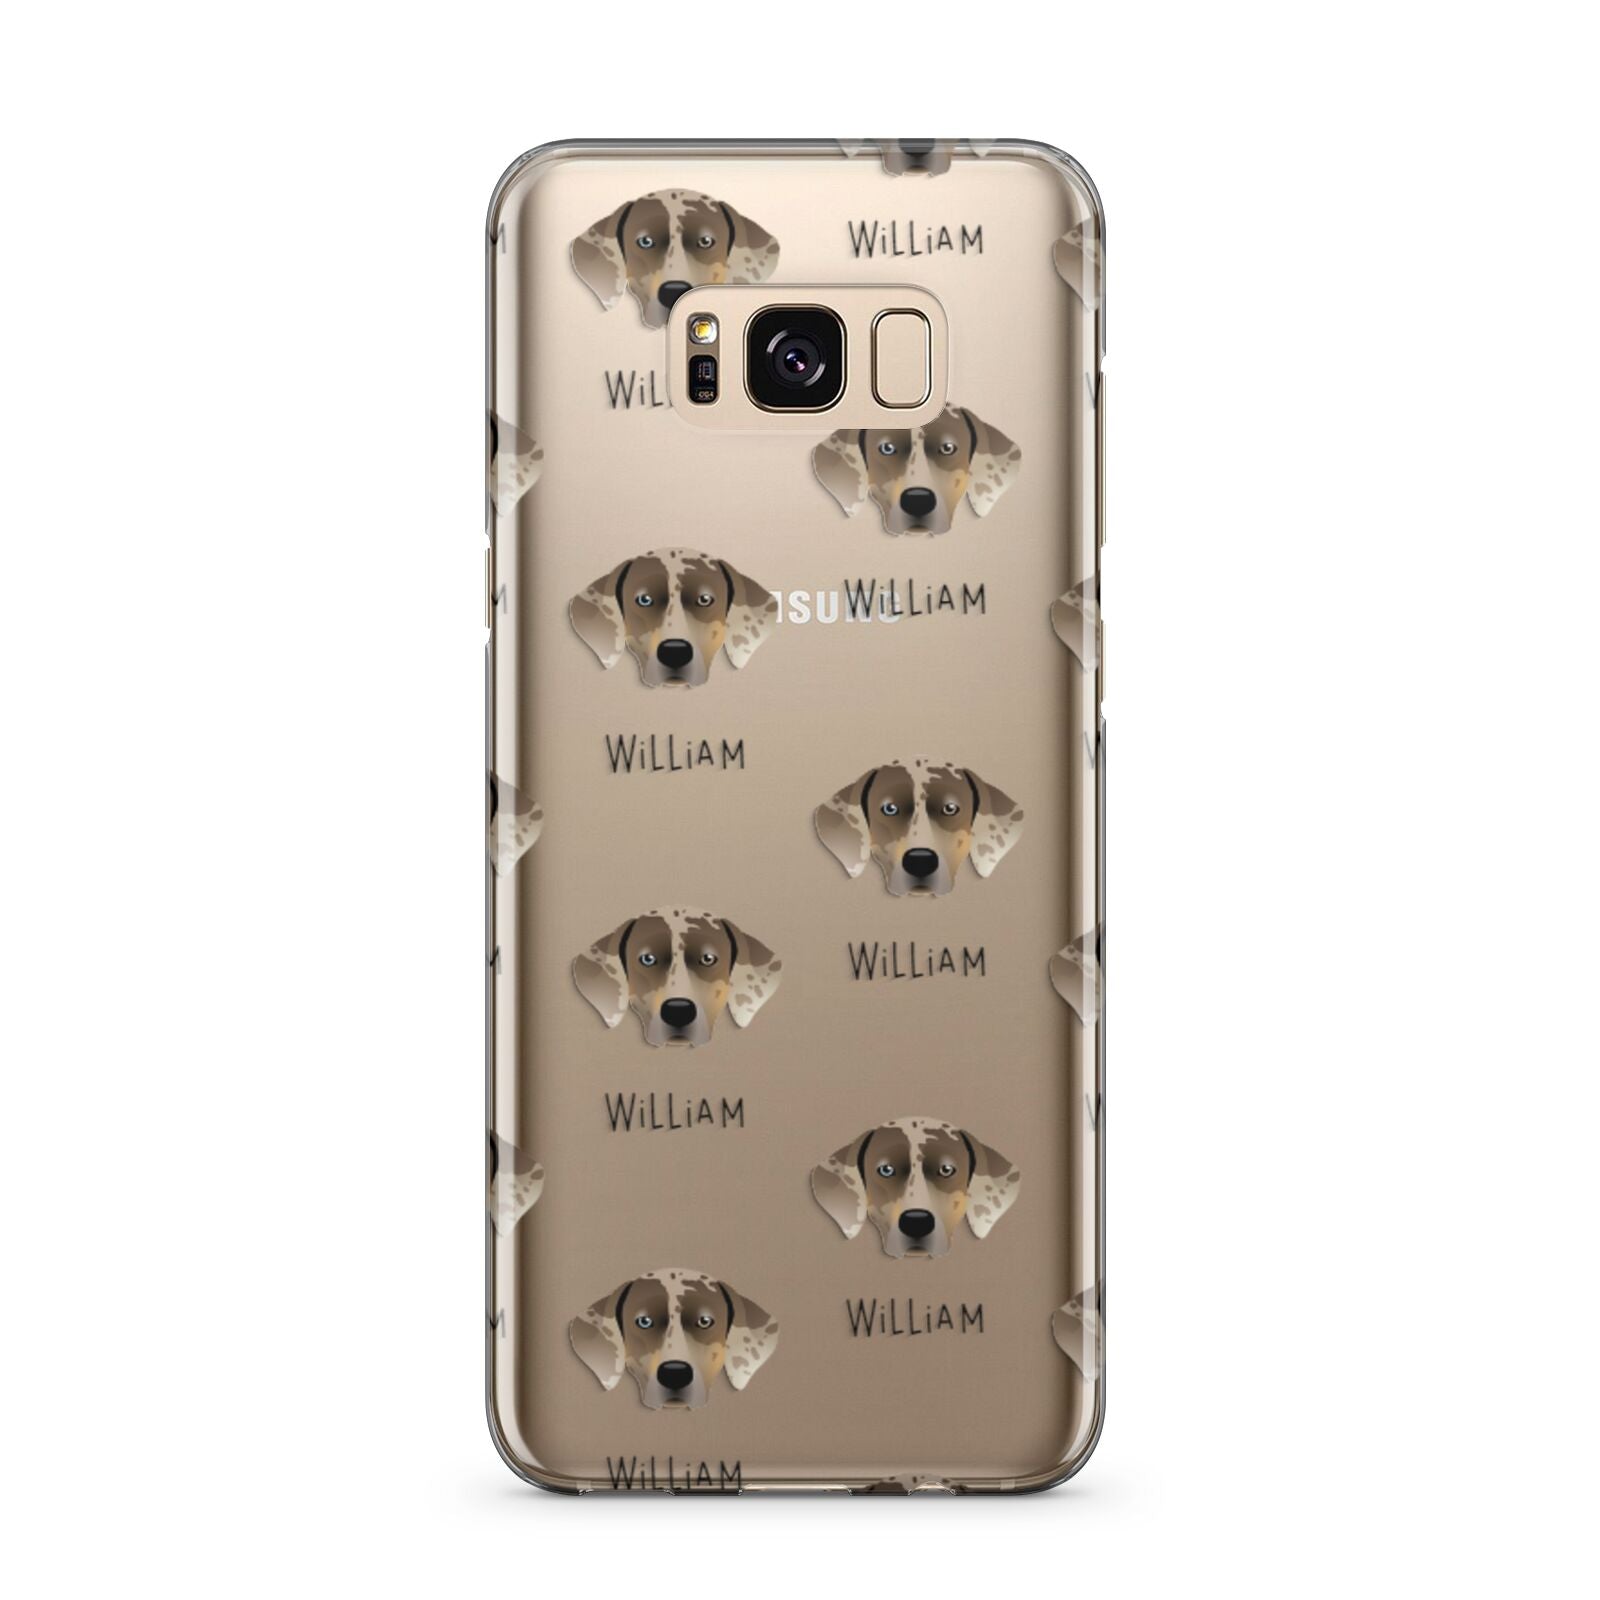 Catahoula Leopard Dog Icon with Name Samsung Galaxy S8 Plus Case